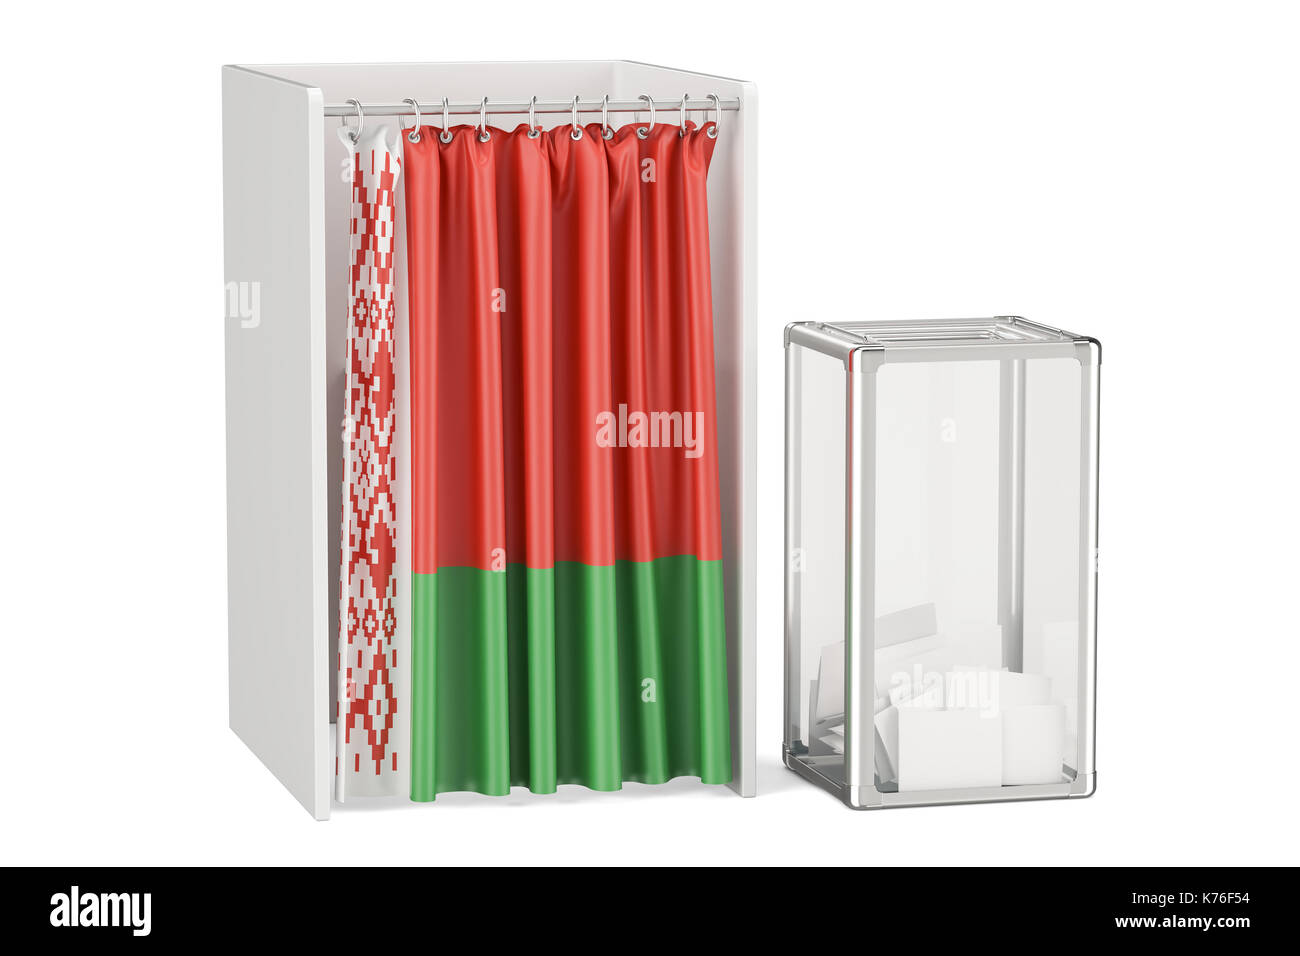 Belorussian election concept, ballot box and voting booths with flag of Belarus, 3D rendering isolated on white background Stock Photo